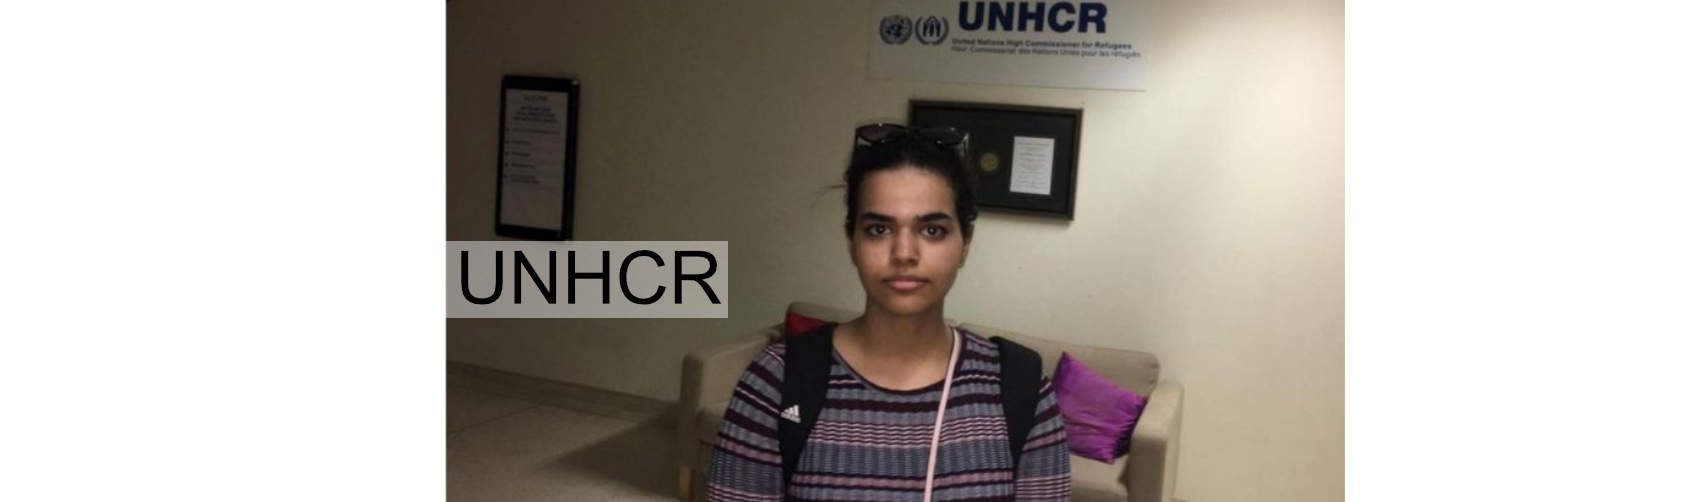 Rahaf Mohammed al-Qunun: has arrived in Canada after being granted asylum